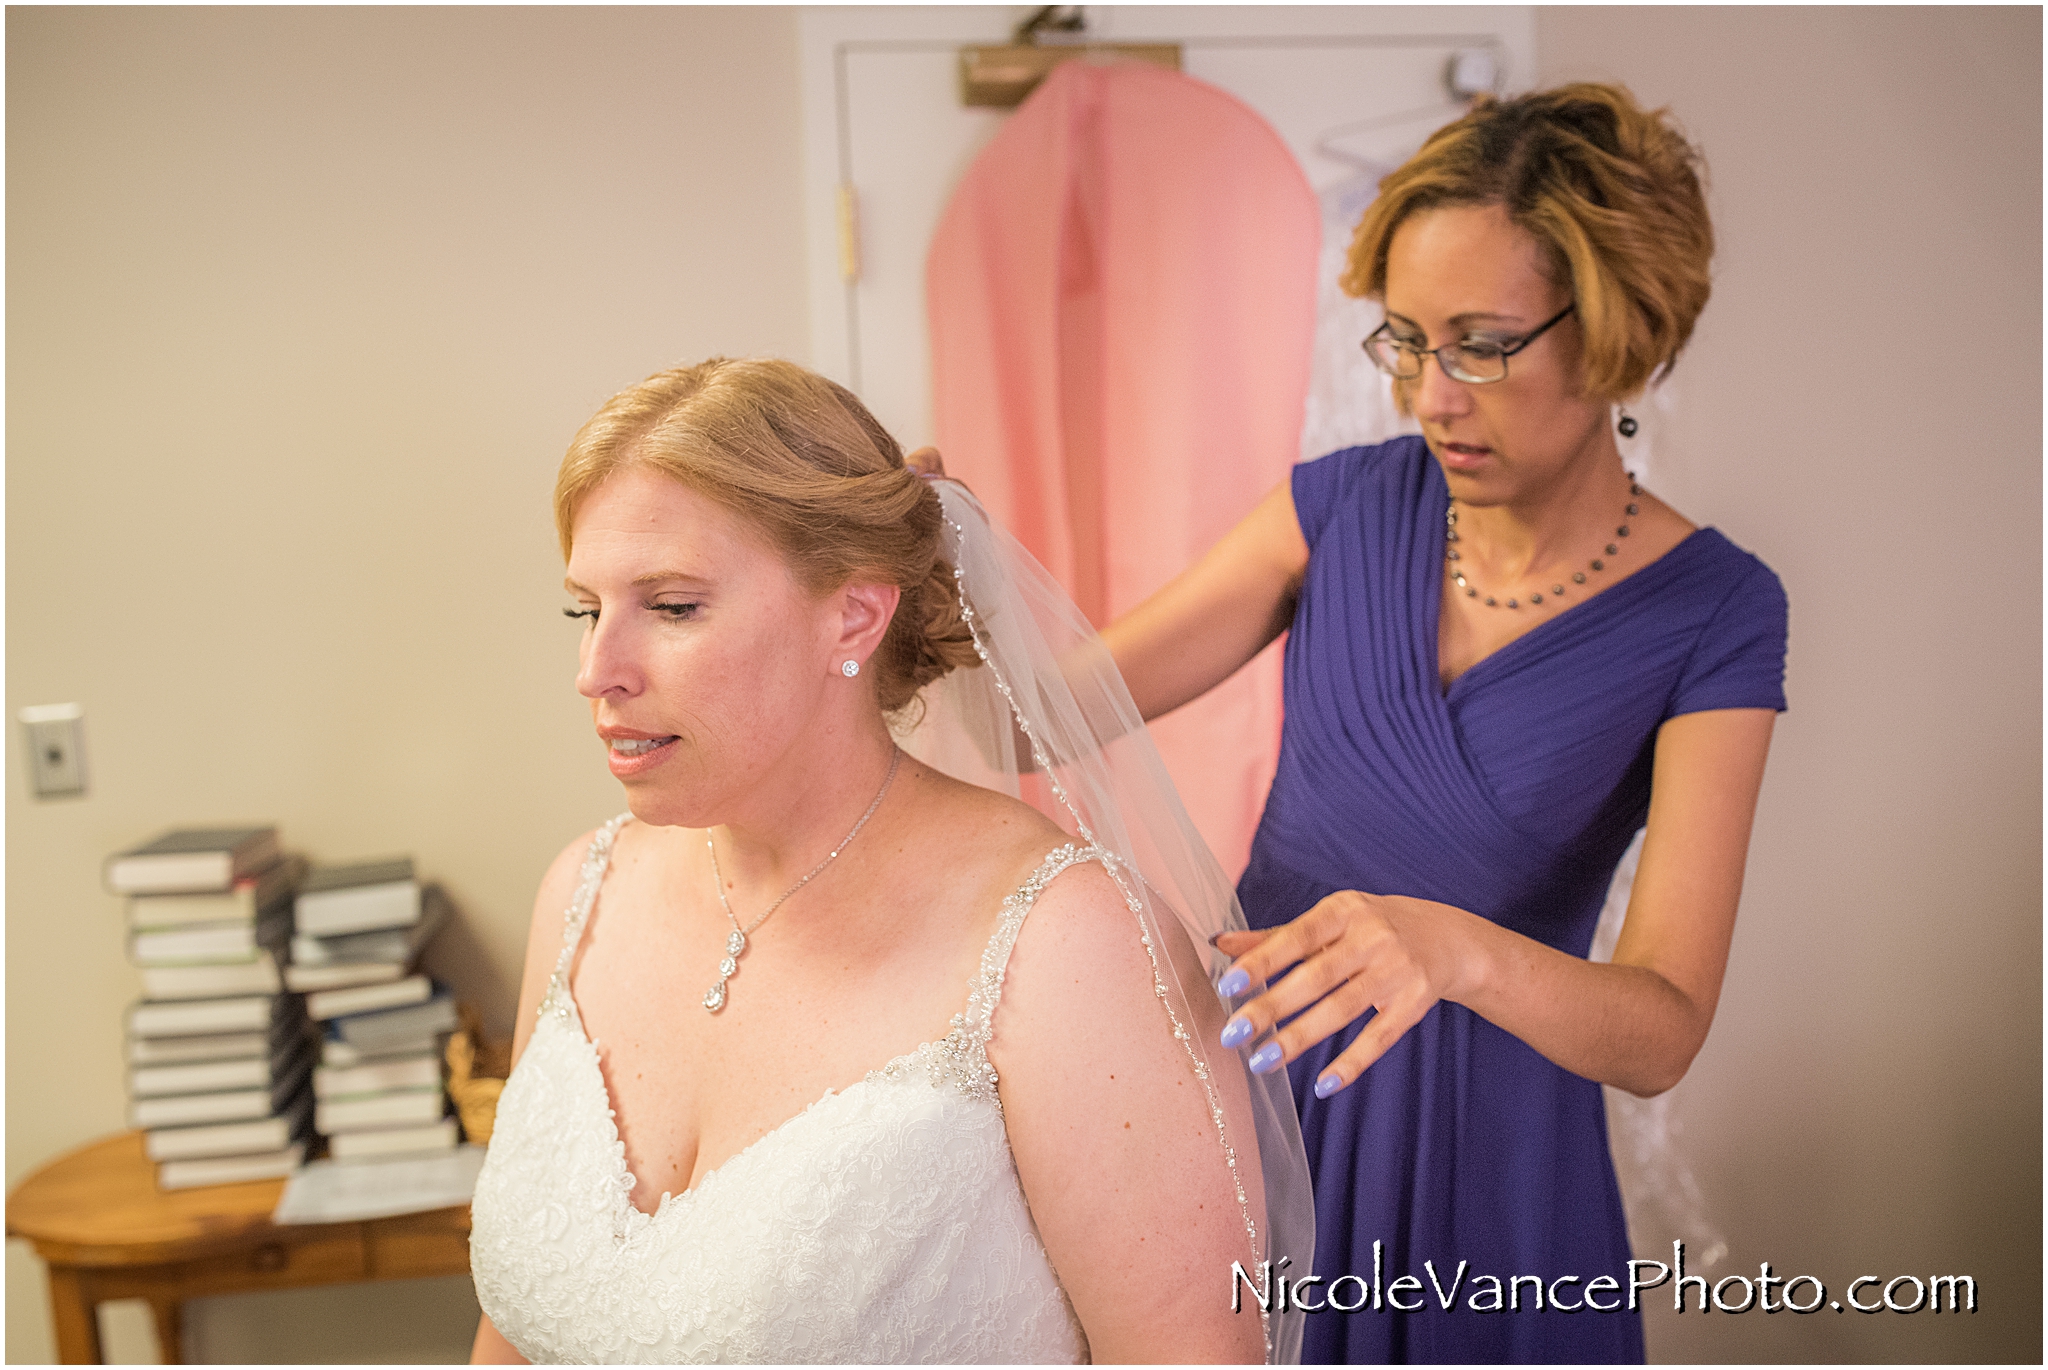 The bride's veil is the final touch for her perfect look.